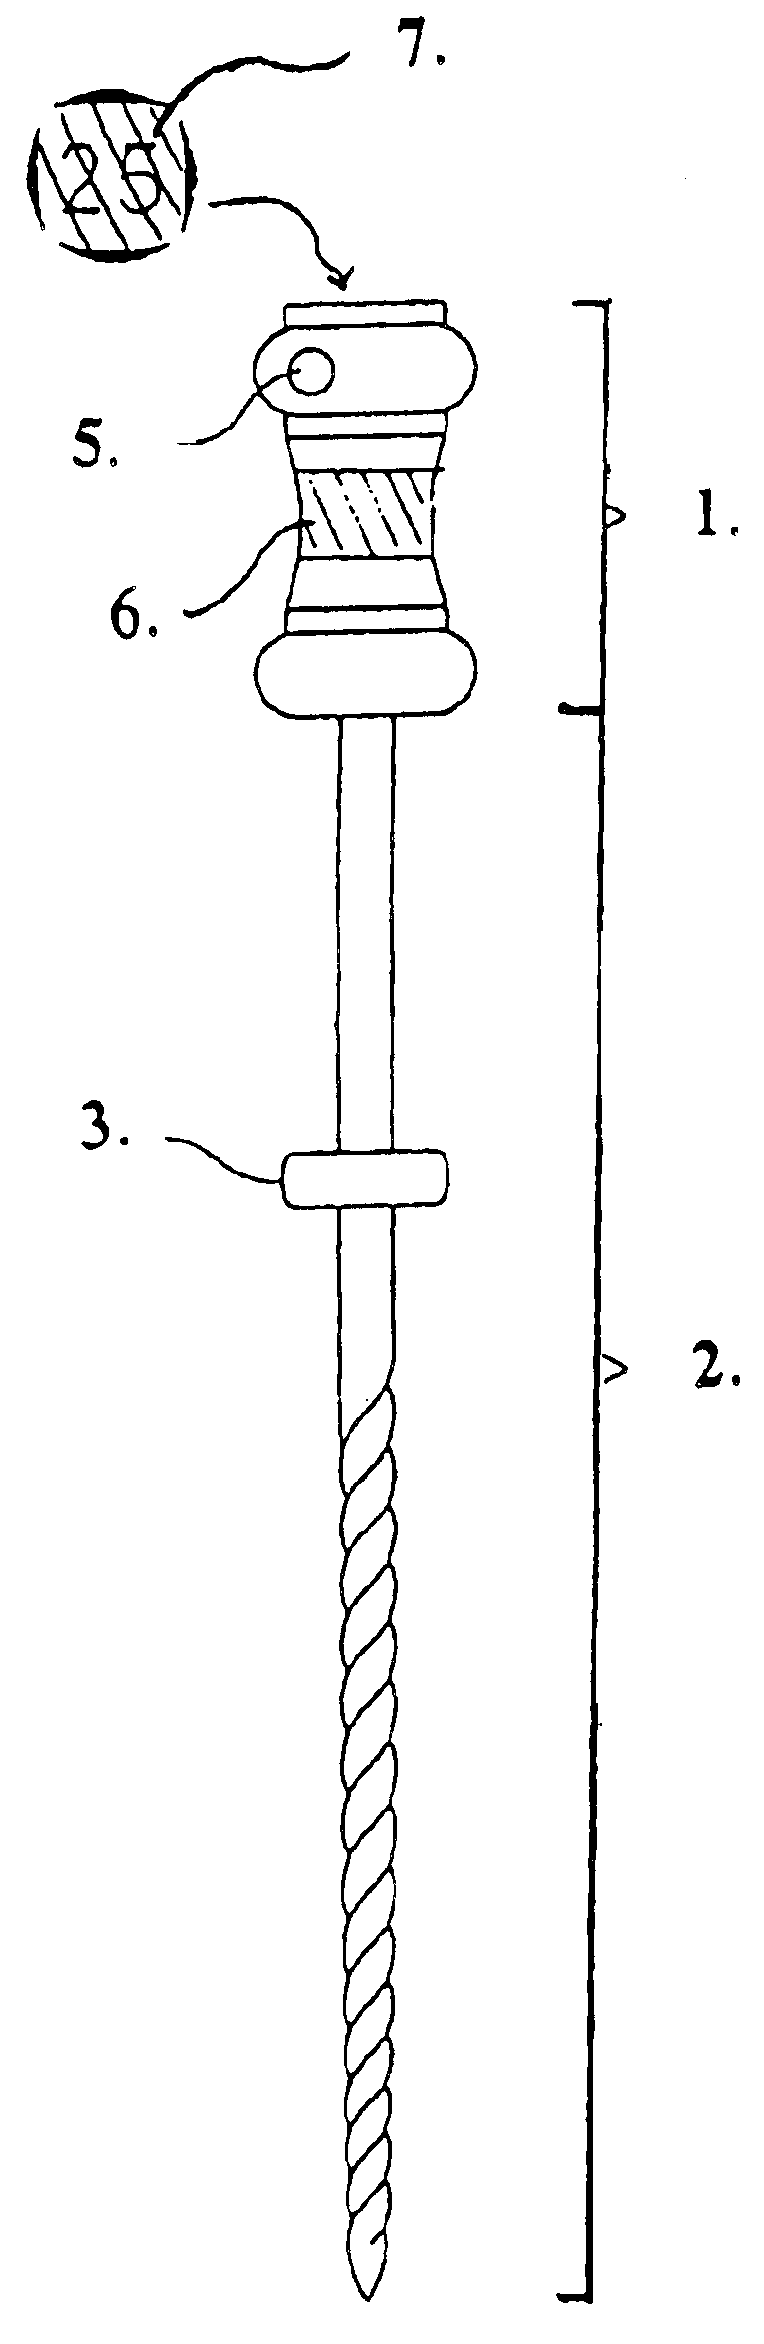 Endodontic file with a metallic conductor as part of the plastic handle to facilitate use of electronic apex locators